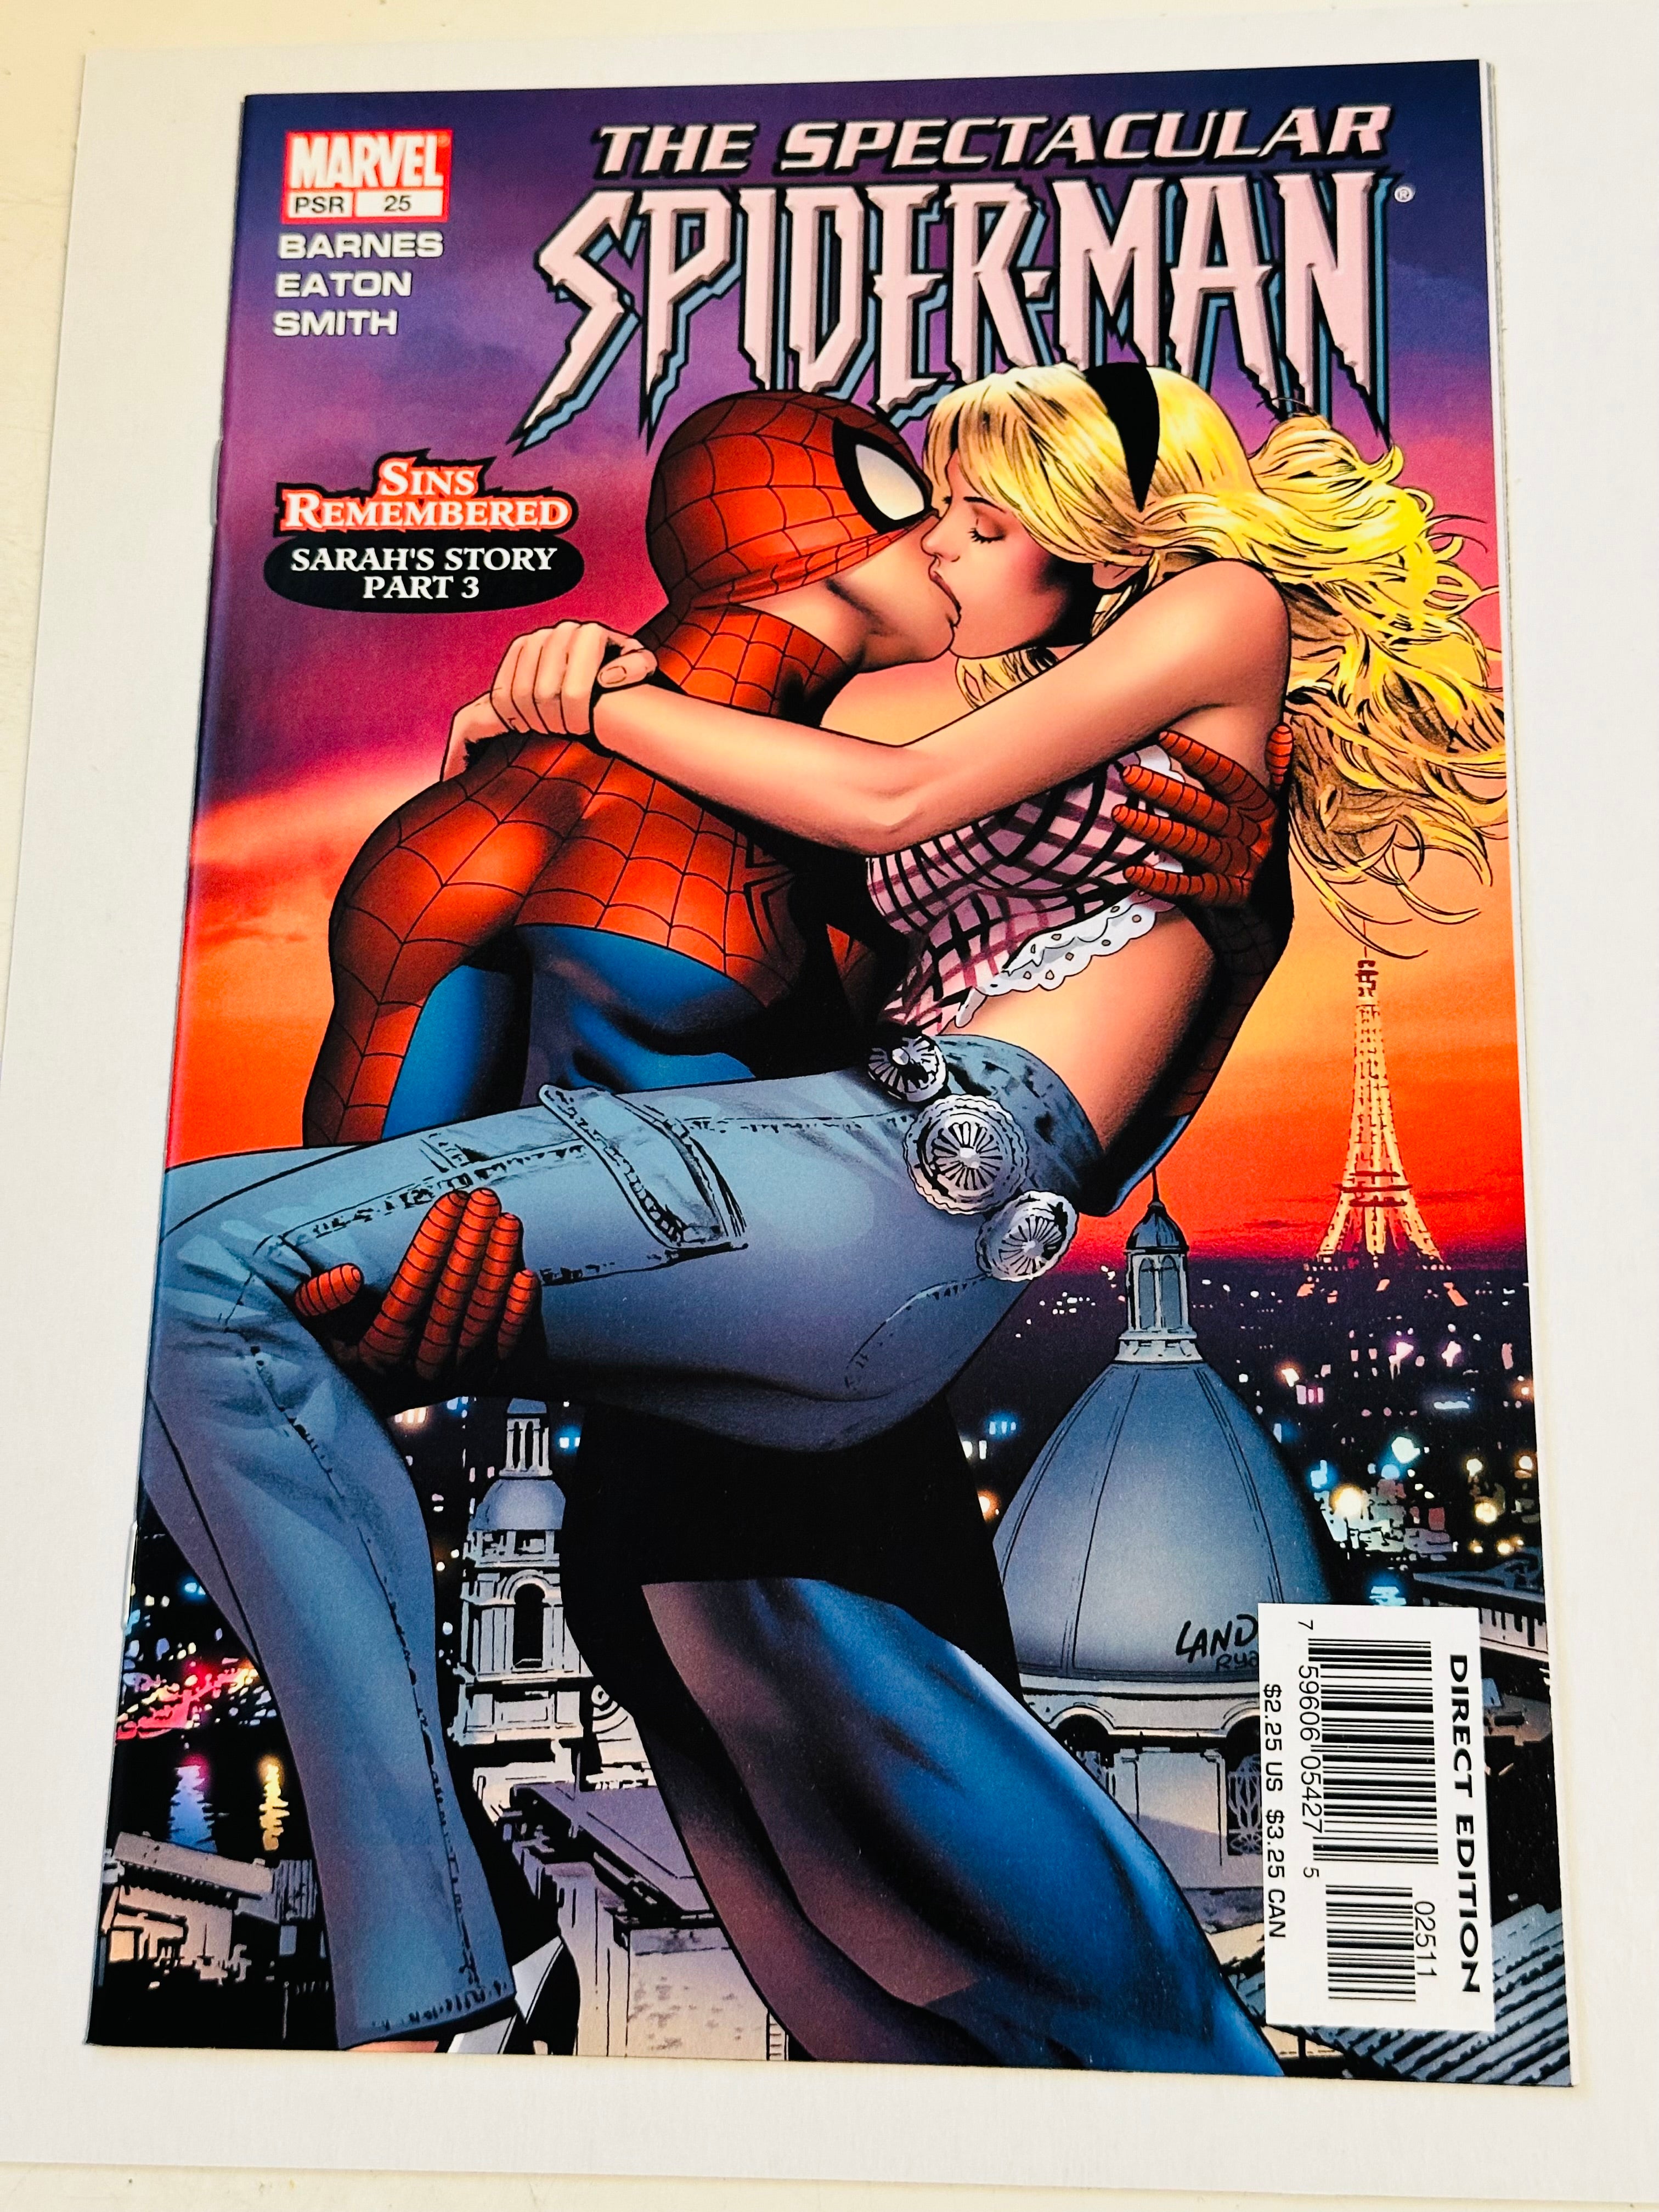 Spectacular Spider-Man number 25 high-grade condition, comic book